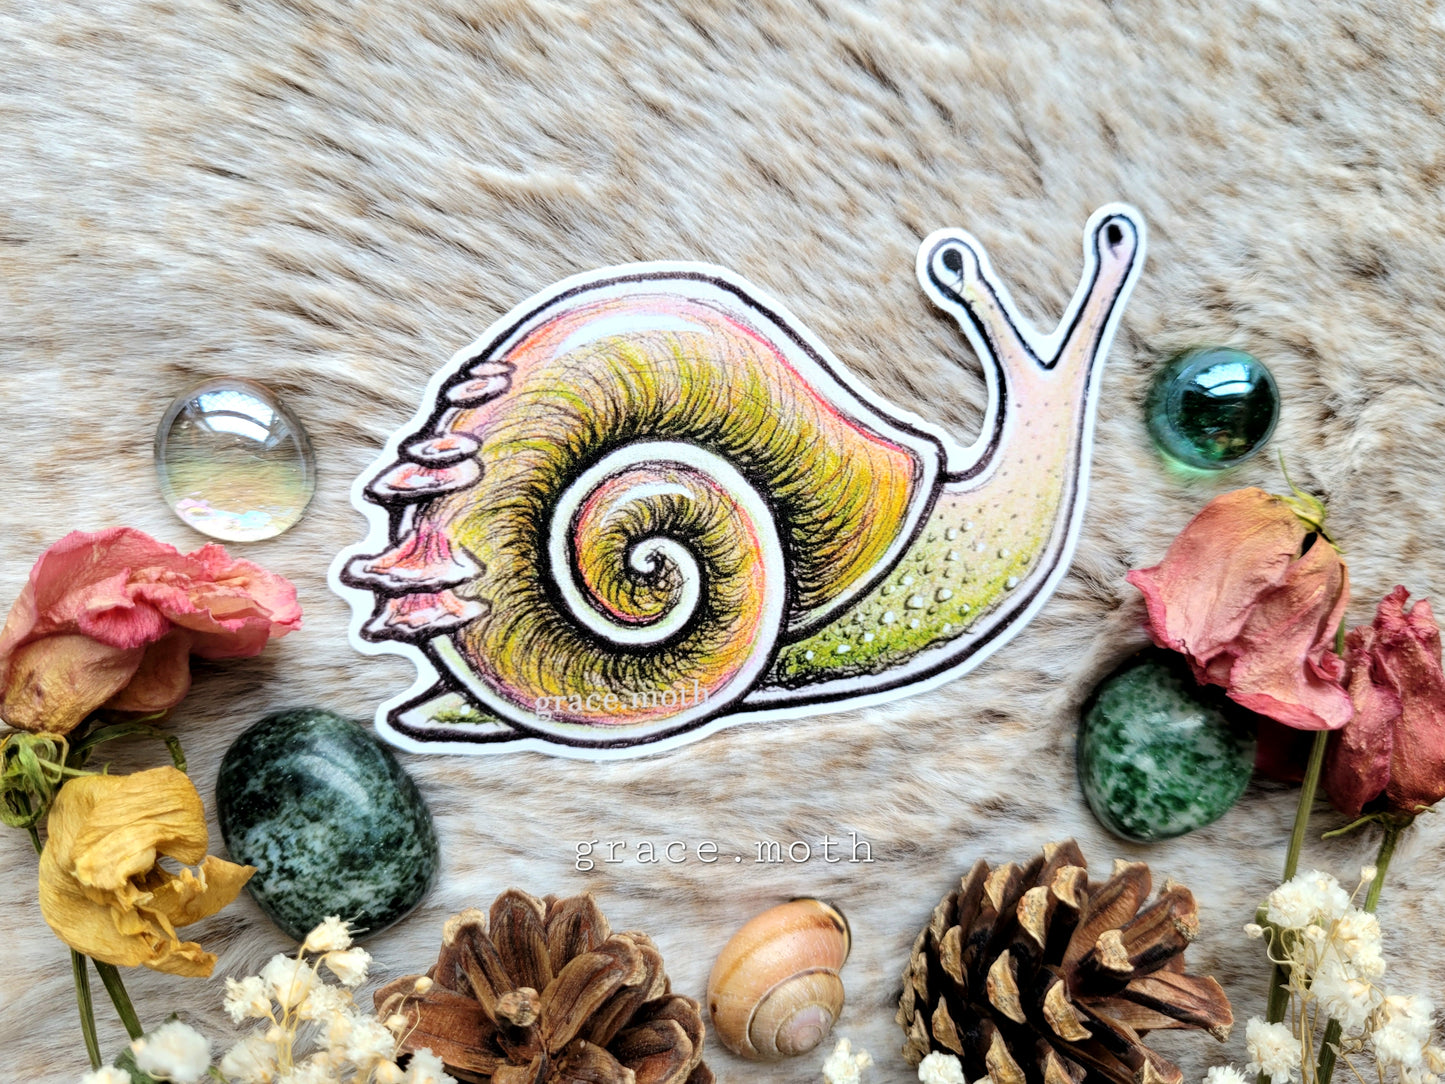 Cute Snail - Vinyl Sticker 10cm - Cottagecore - Witchy - Gothic - Illustrated by Grace moth